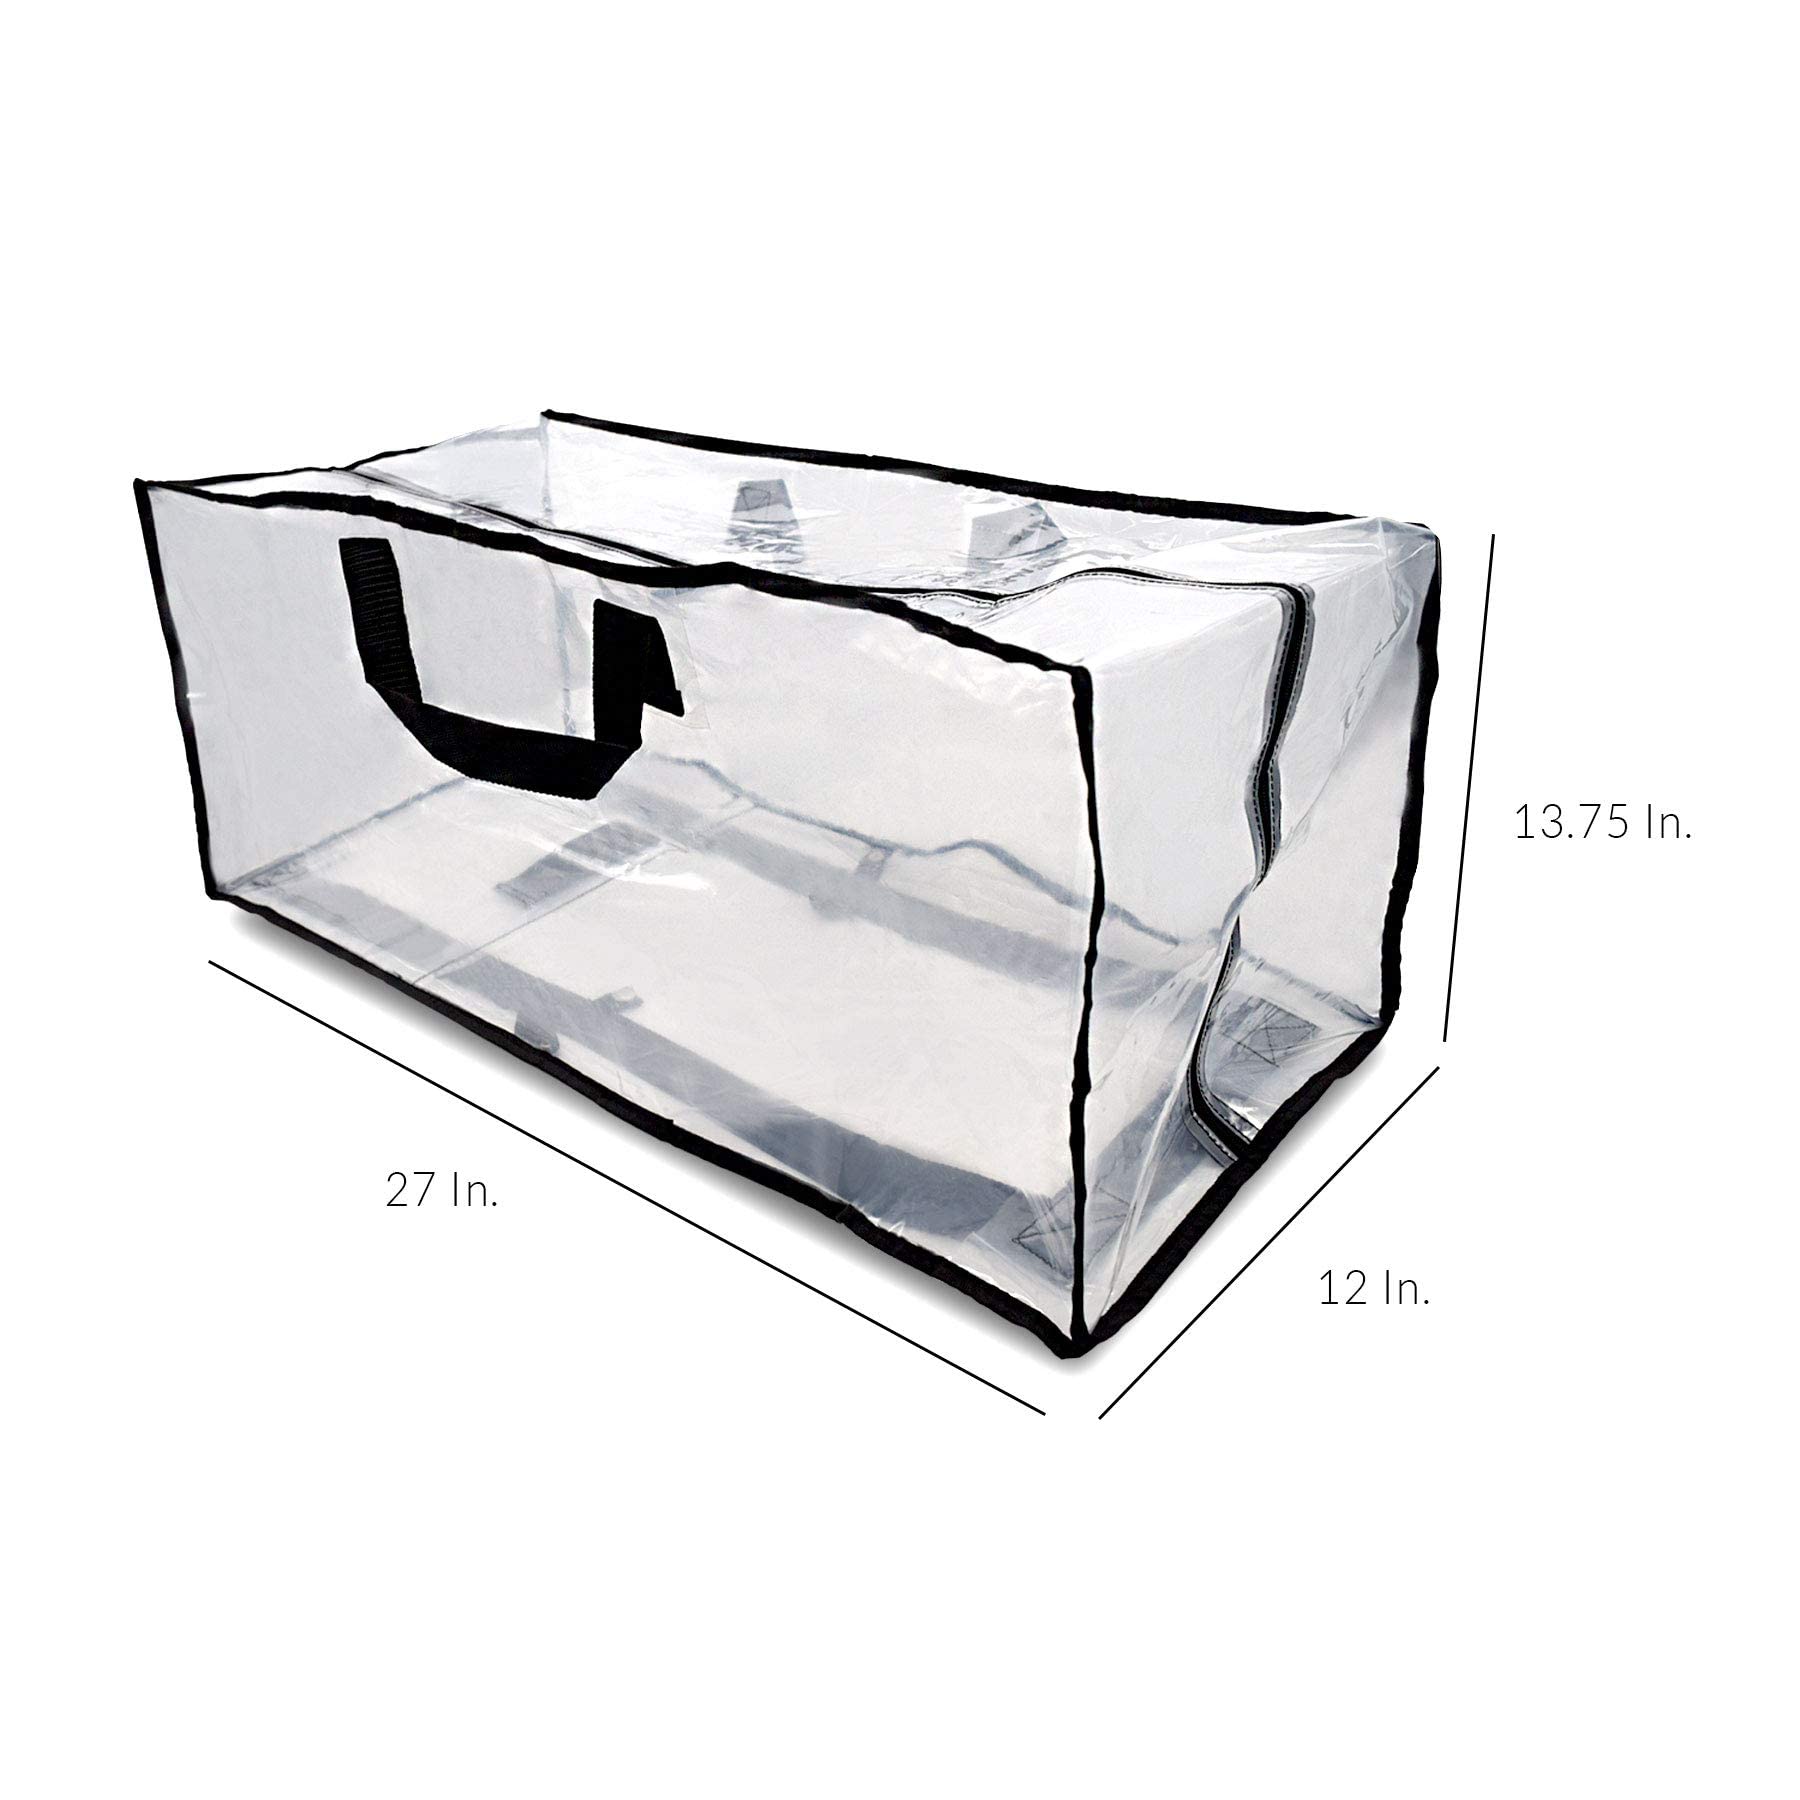 Clear Storage Bags - 3 Pack Zippered Moving Bags, See Thru Transparent Heavy Duty Totes with Handles, Large & Waterproof for Clothes, Blankets, Linens, Packing, Organizing, Under Bed - 27x12x13.75  - Good